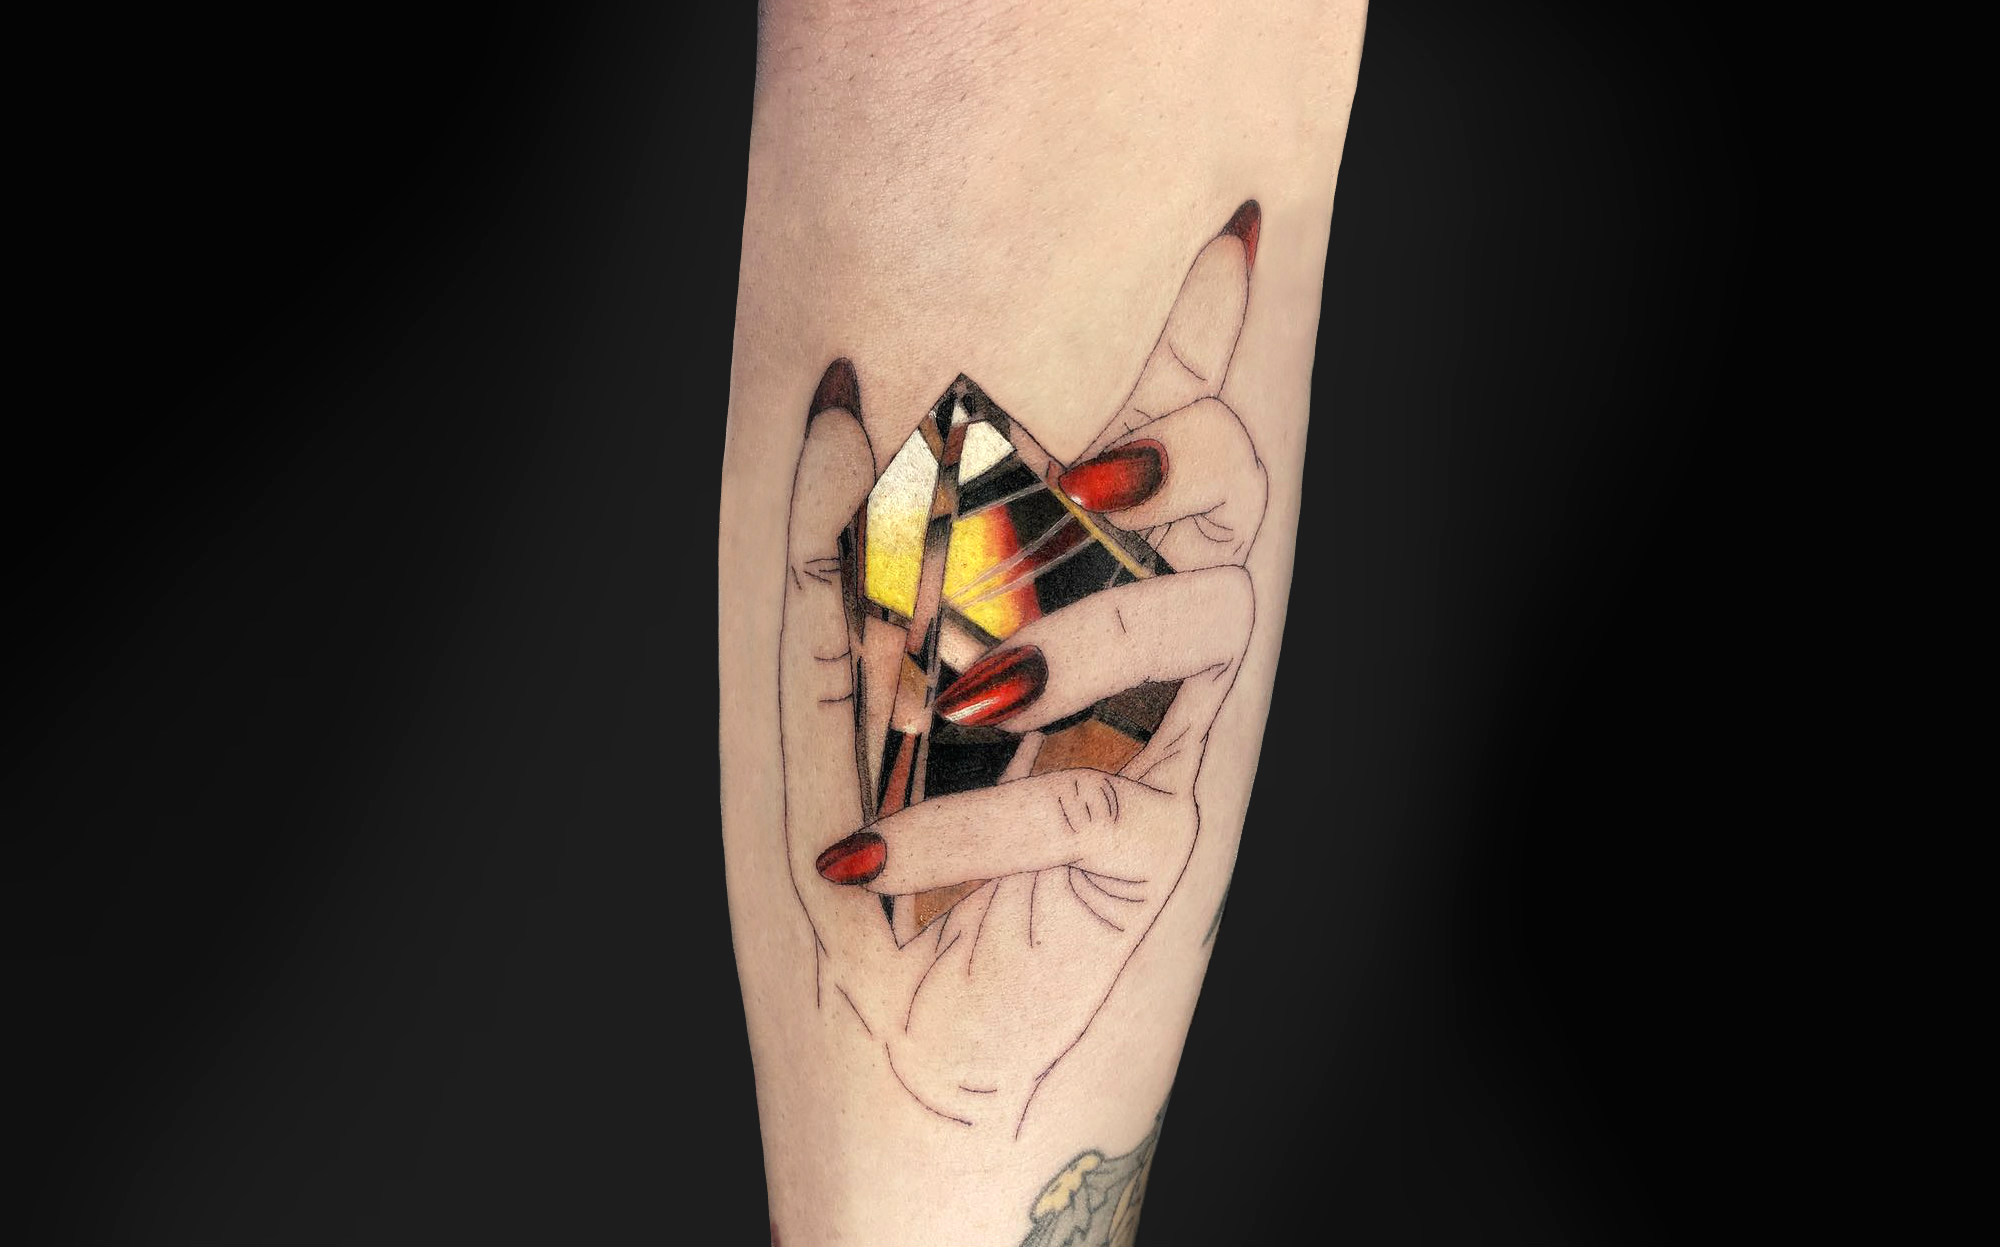 Reflective prism tattoo by Shannon Perry